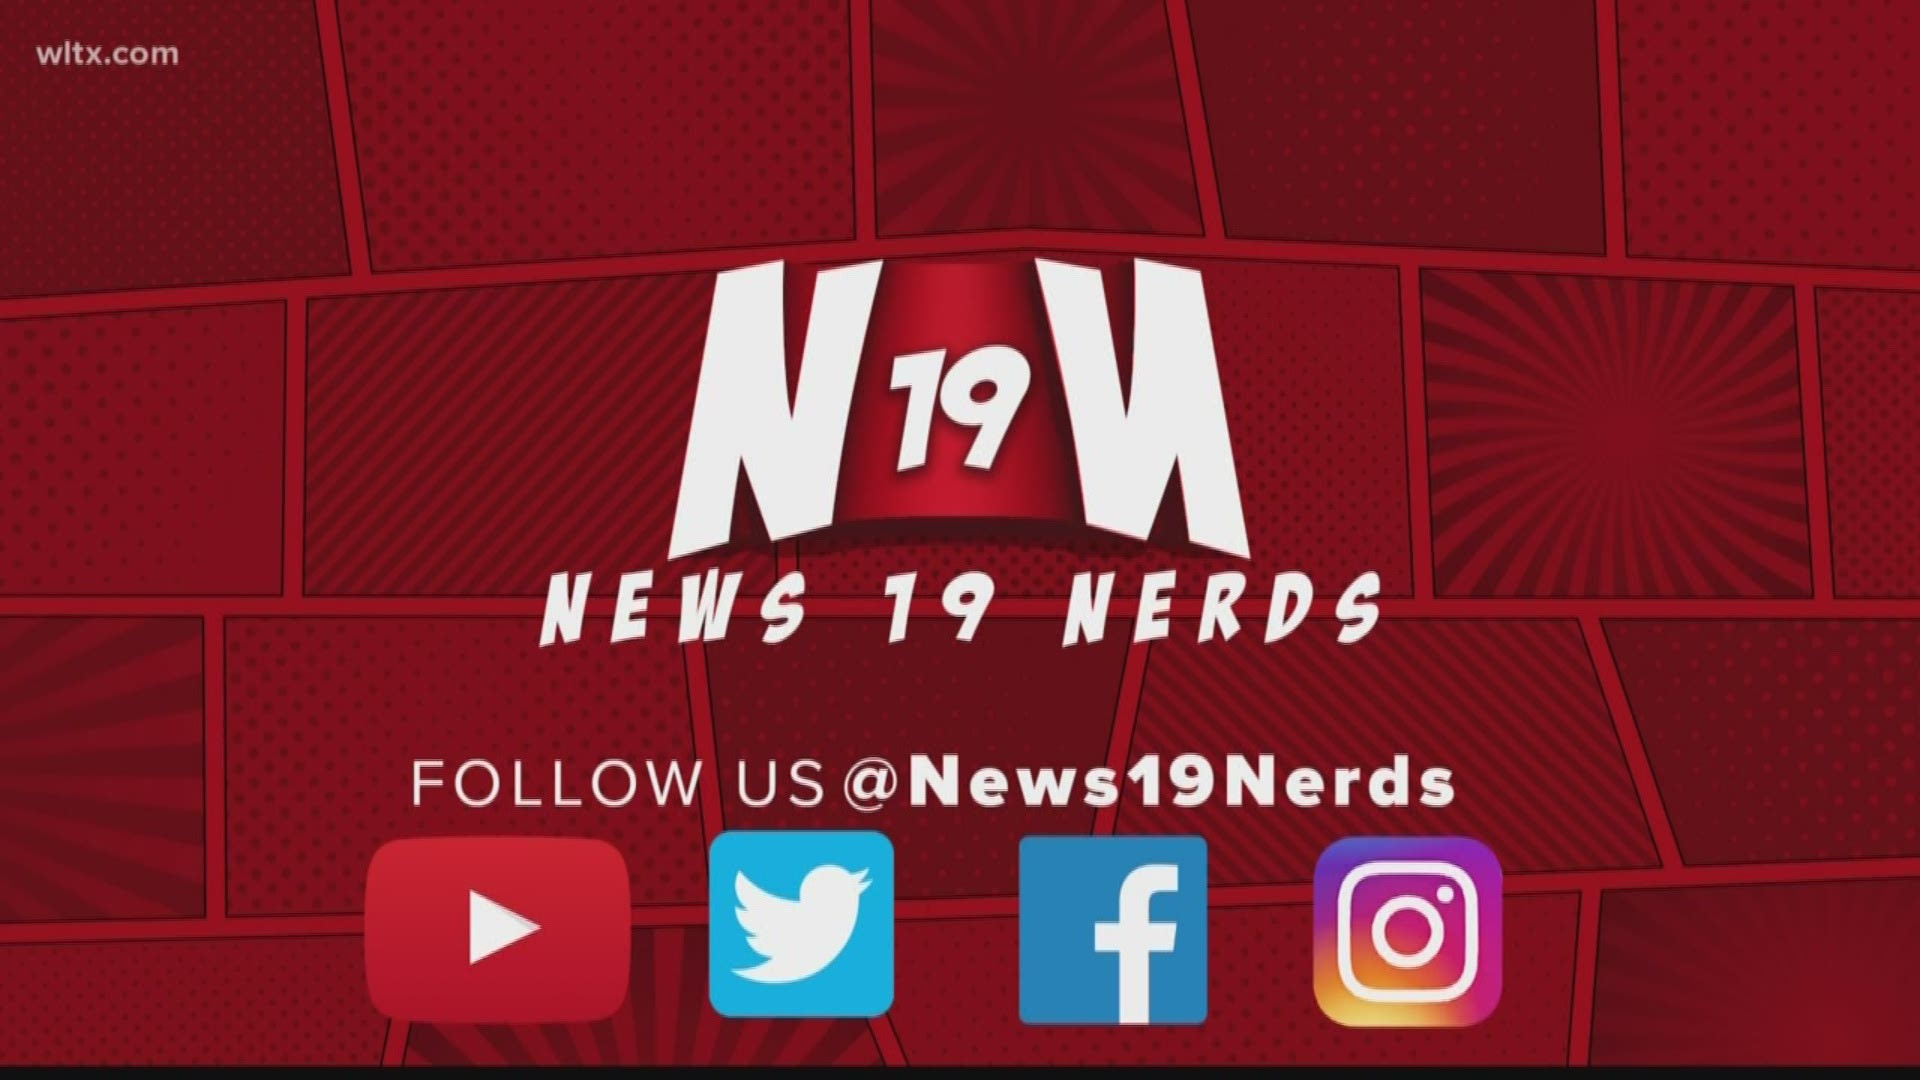 News19's Leroy Green and Michael Patterson from the News19 Nerds provide all of the latest "nerd news" for April 26, 2019.